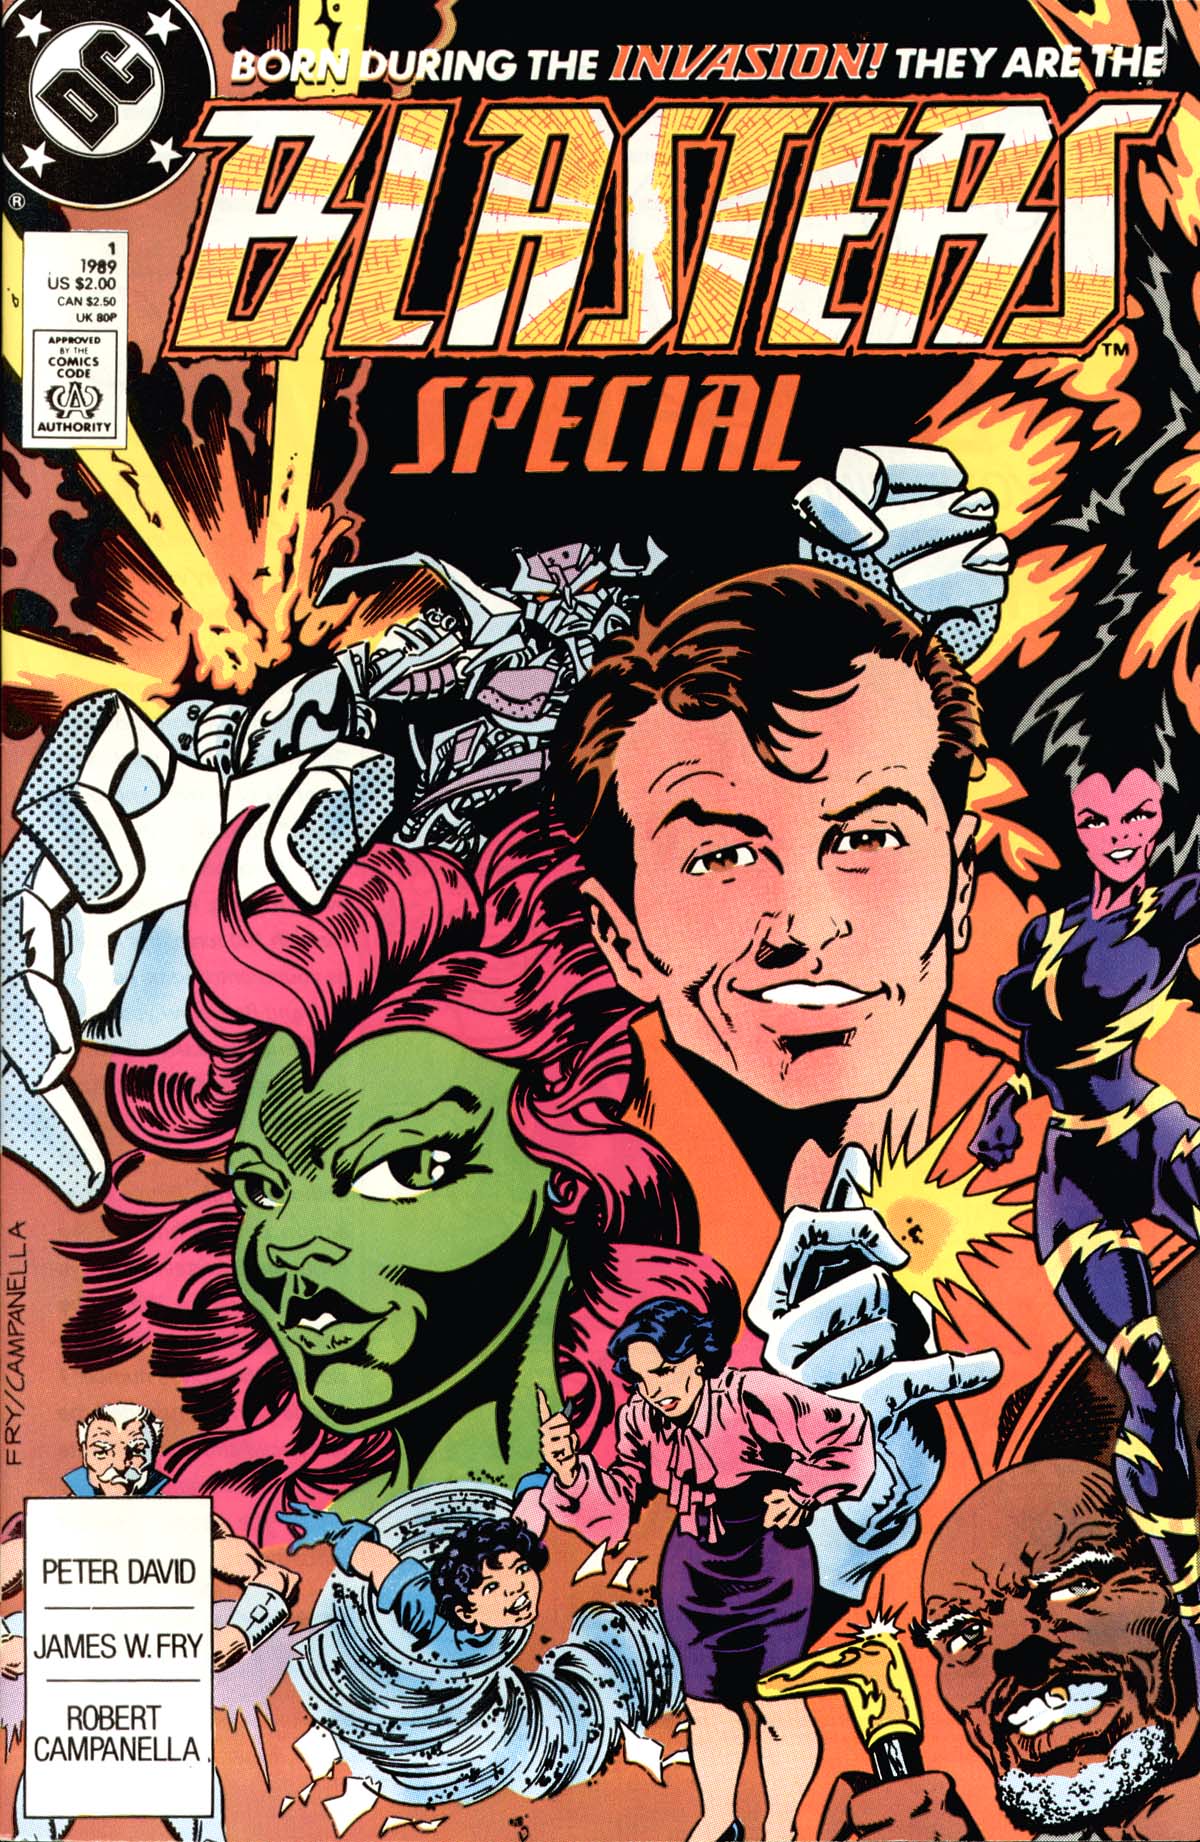 Read online Blasters Special comic -  Issue # Full - 1